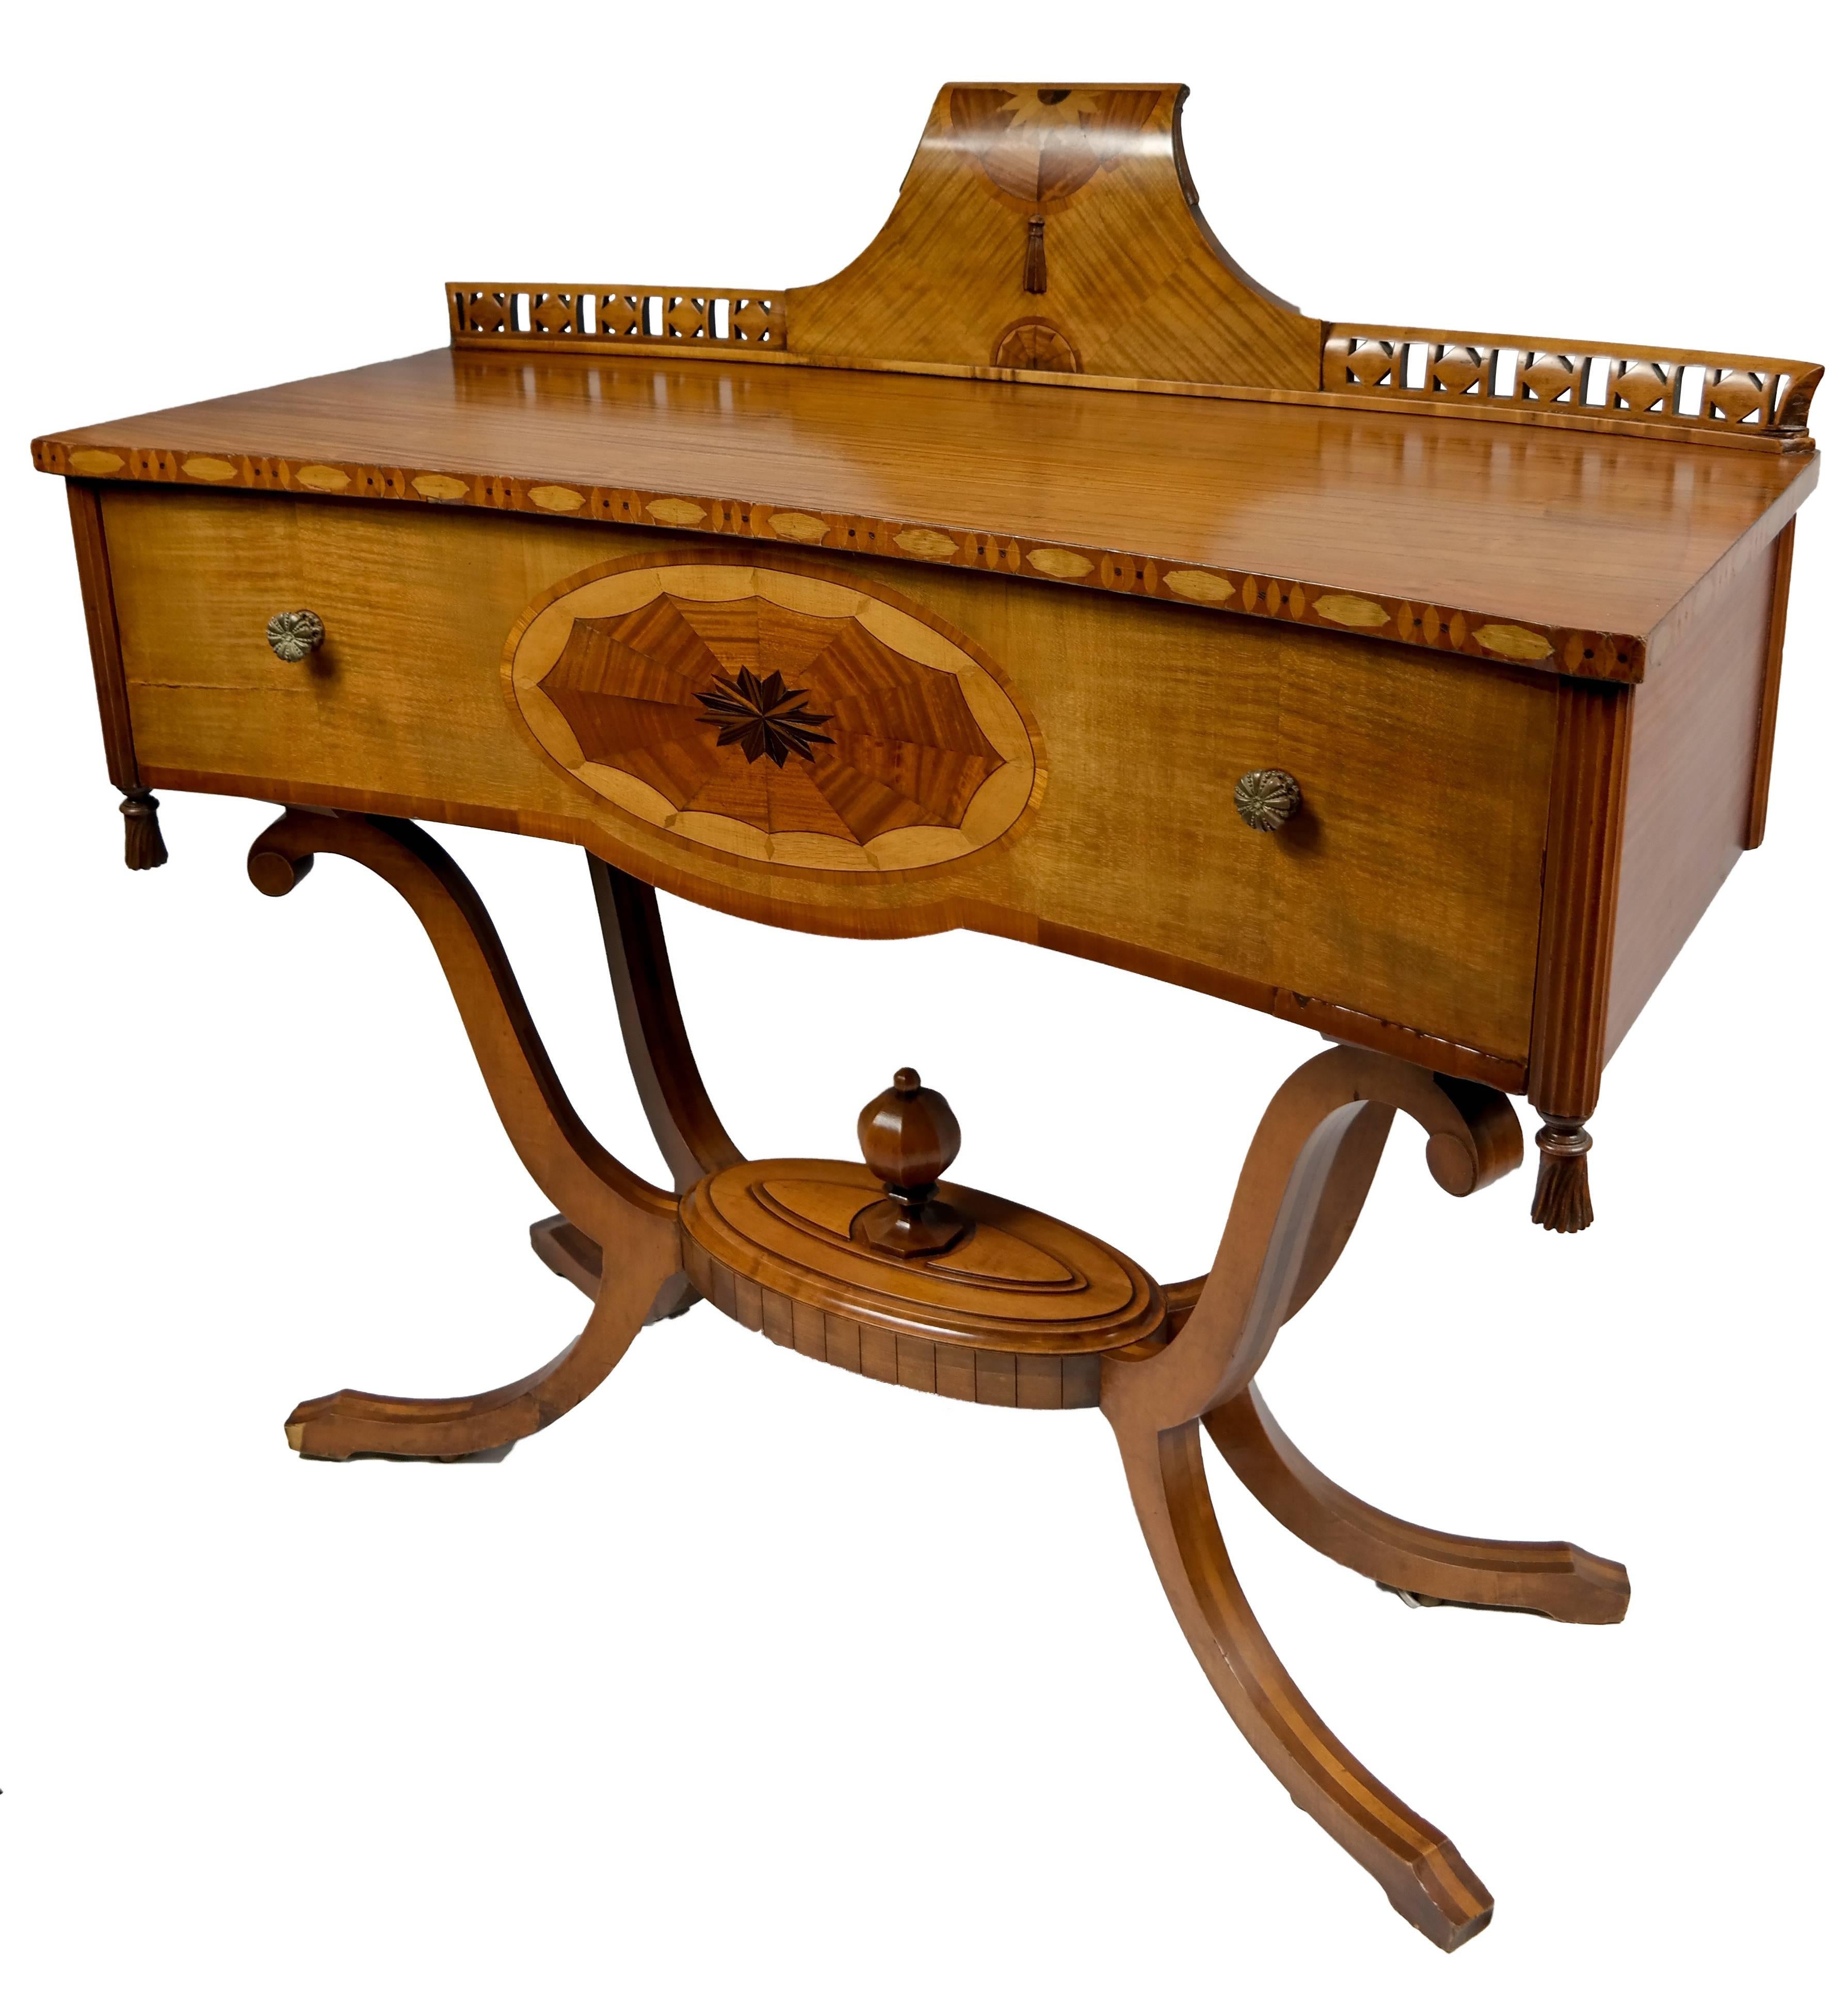 Satin Mahogany server with tiger maple drawer, below a reticulated and inlaid back splash, on inlaid feet, American, mid 20th century.